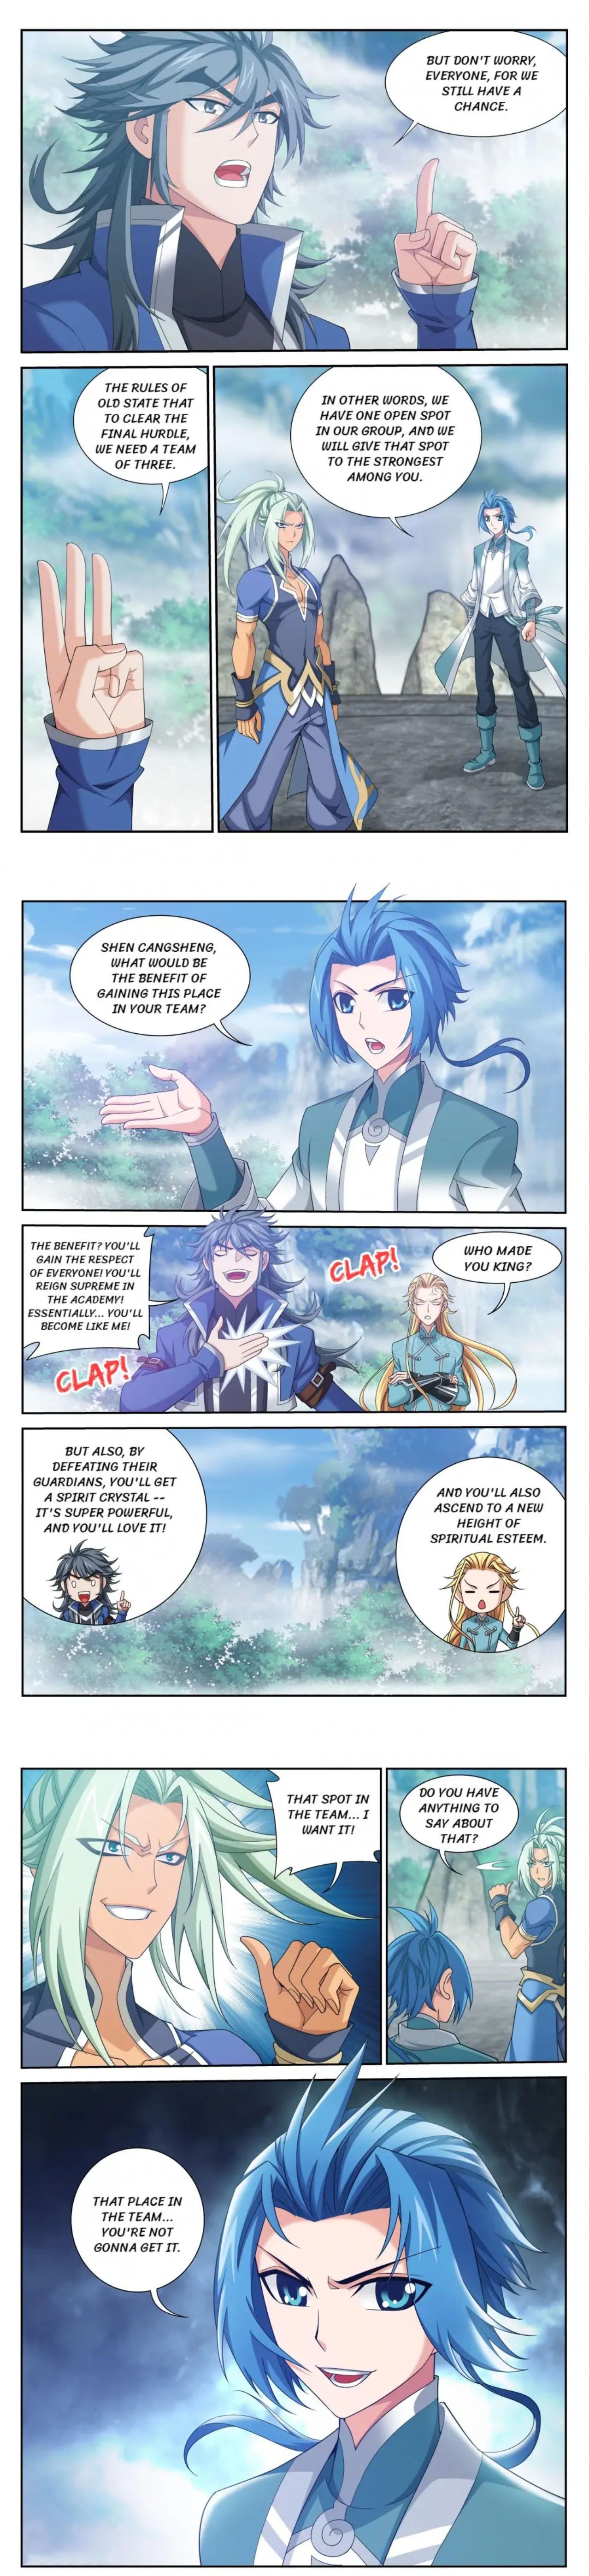 The Great Ruler Chap 158